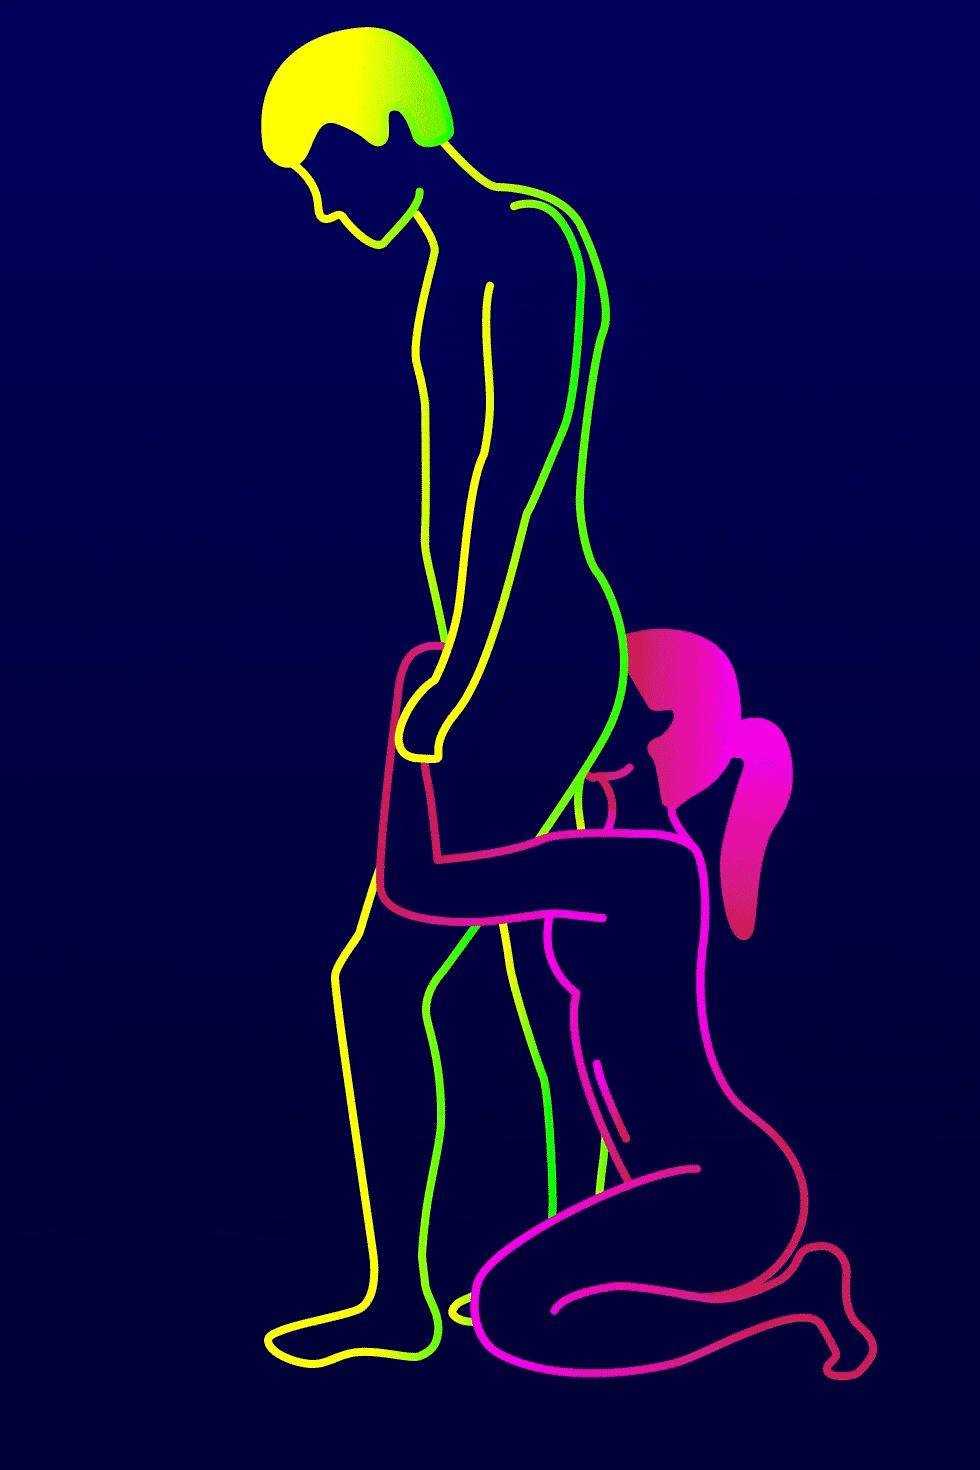 5 Rusty Trombone Sex Positions - Rusty Trombone Variations and How Tos